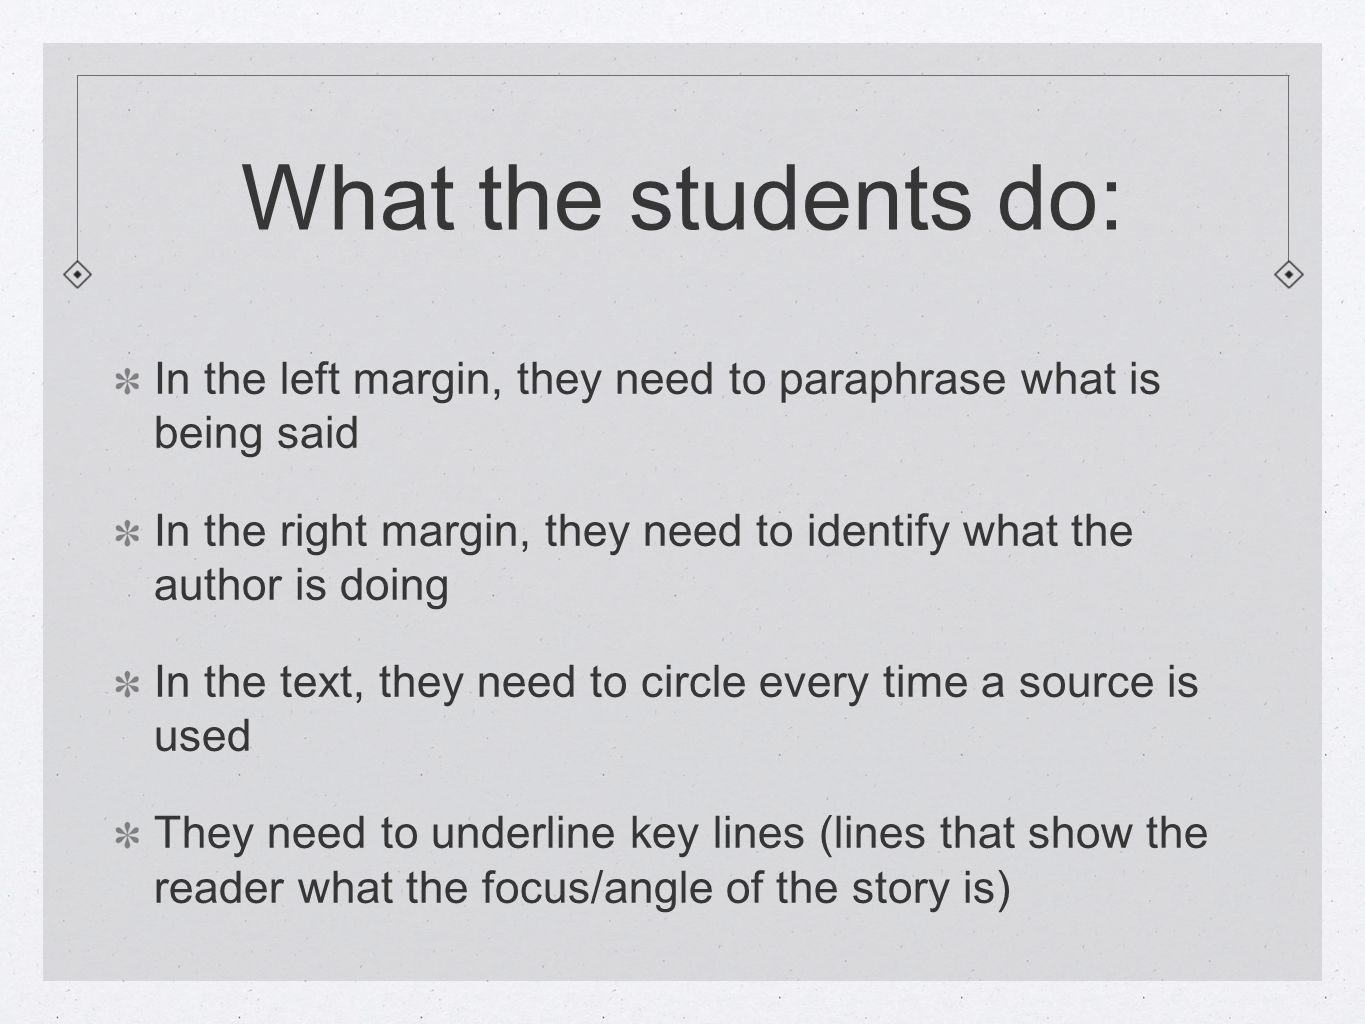 What the students do: In the left margin, they need to paraphrase what is being said In the right margin, they need to identify what the author is doing In the text, they need to circle every time a source is used They need to underline key lines (lines that show the reader what the focus/angle of the story is)